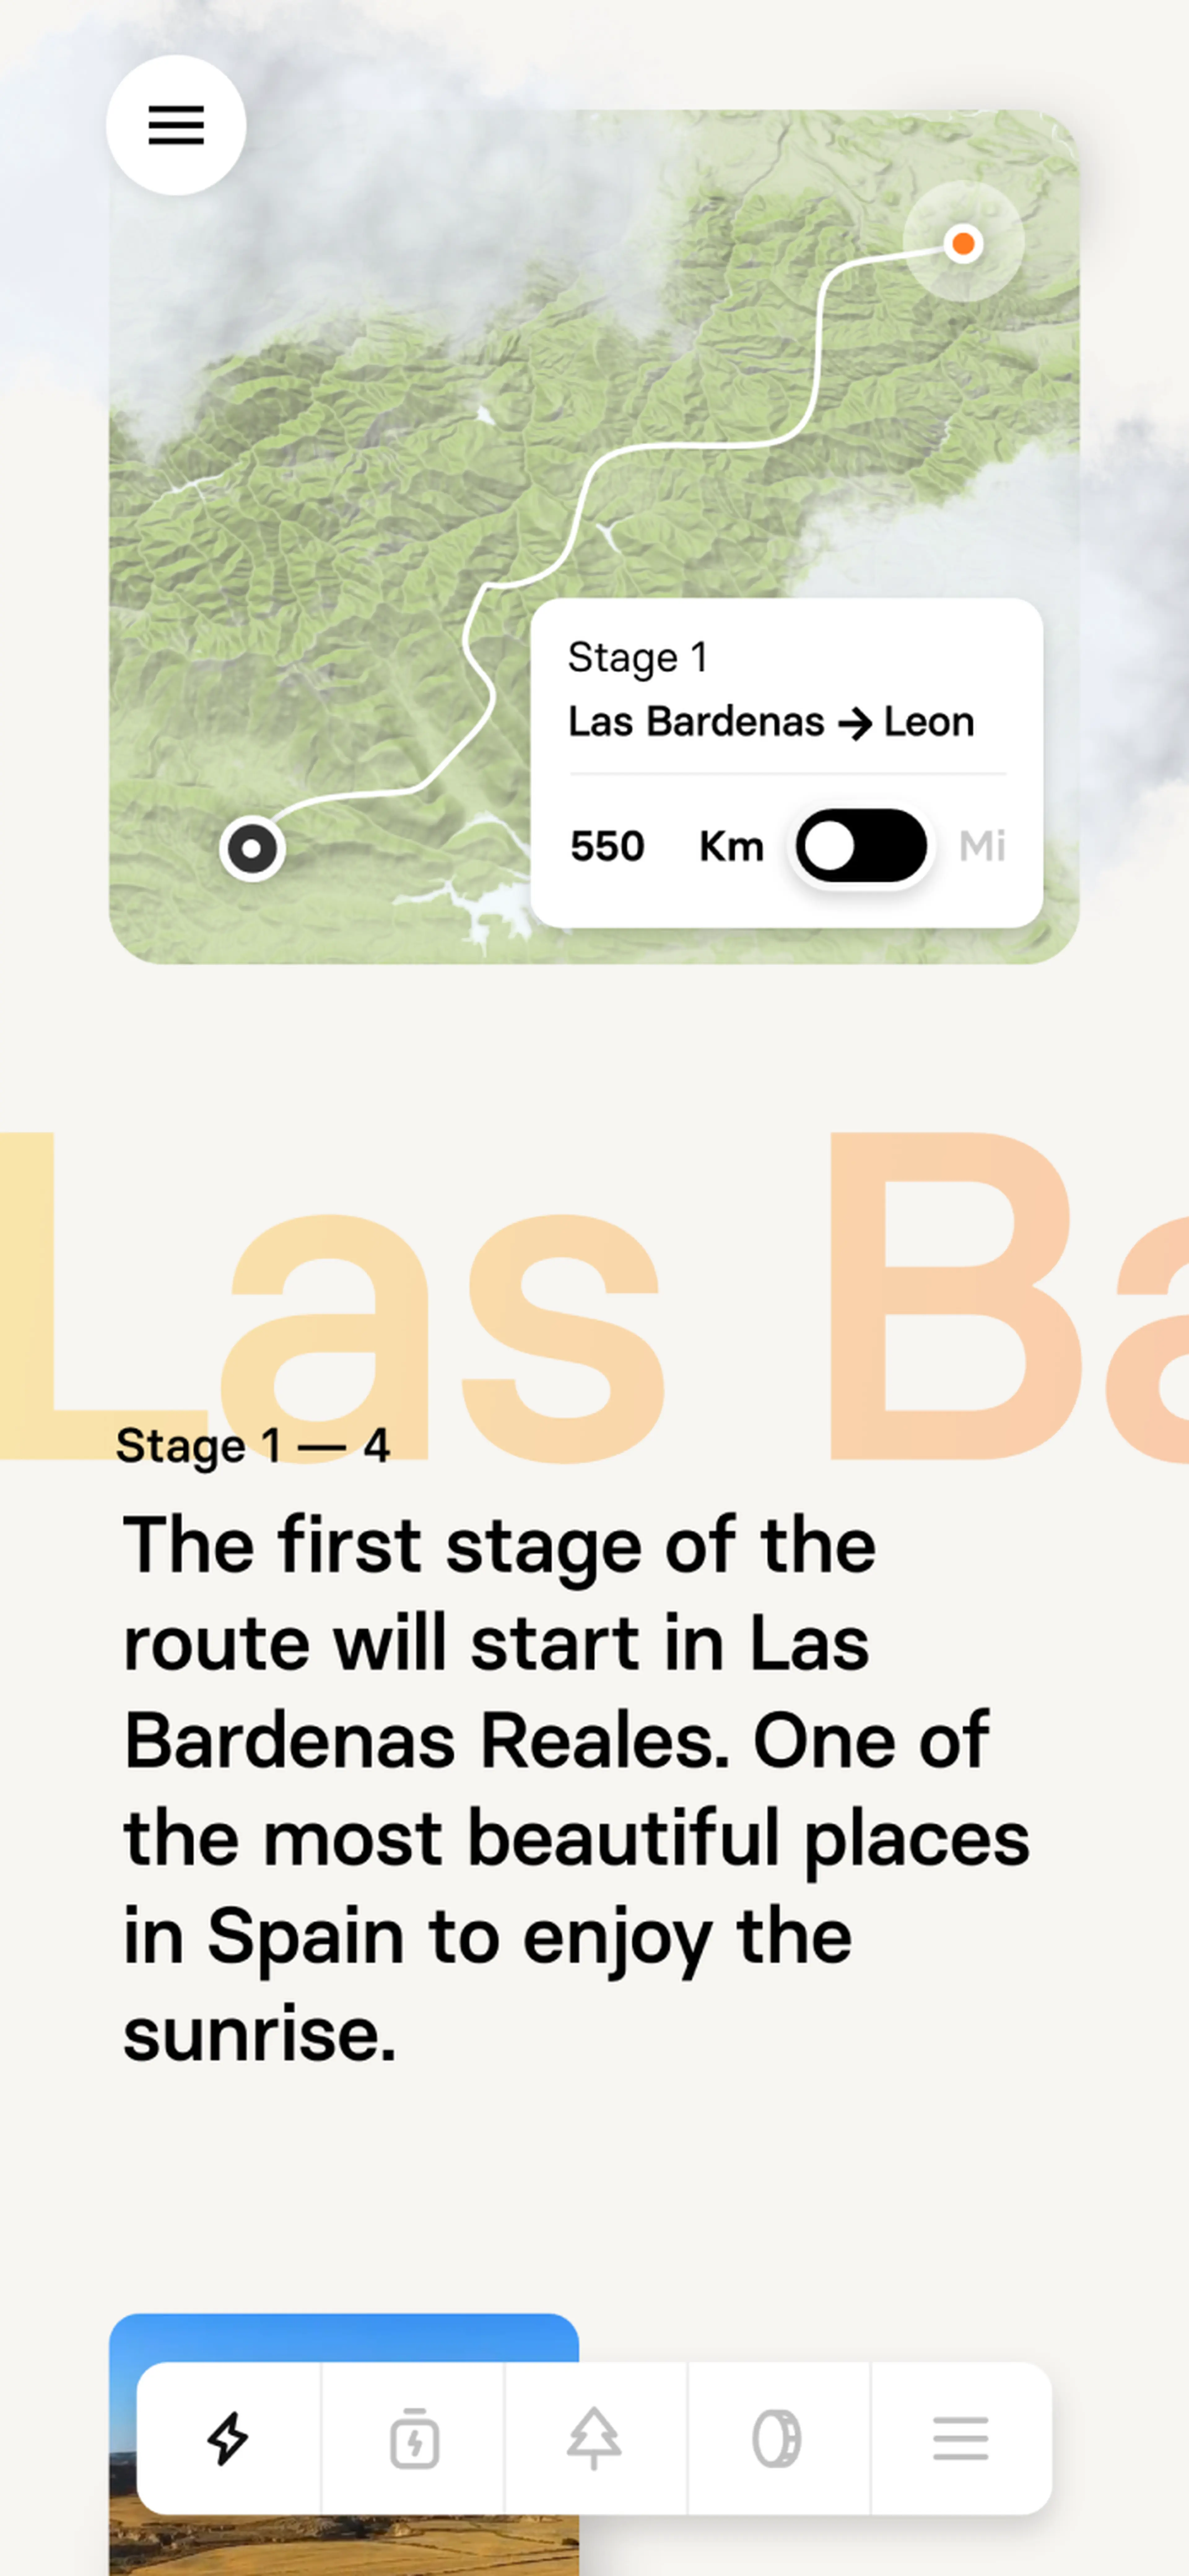 Mobile design of the first part of a route showing a map and short description